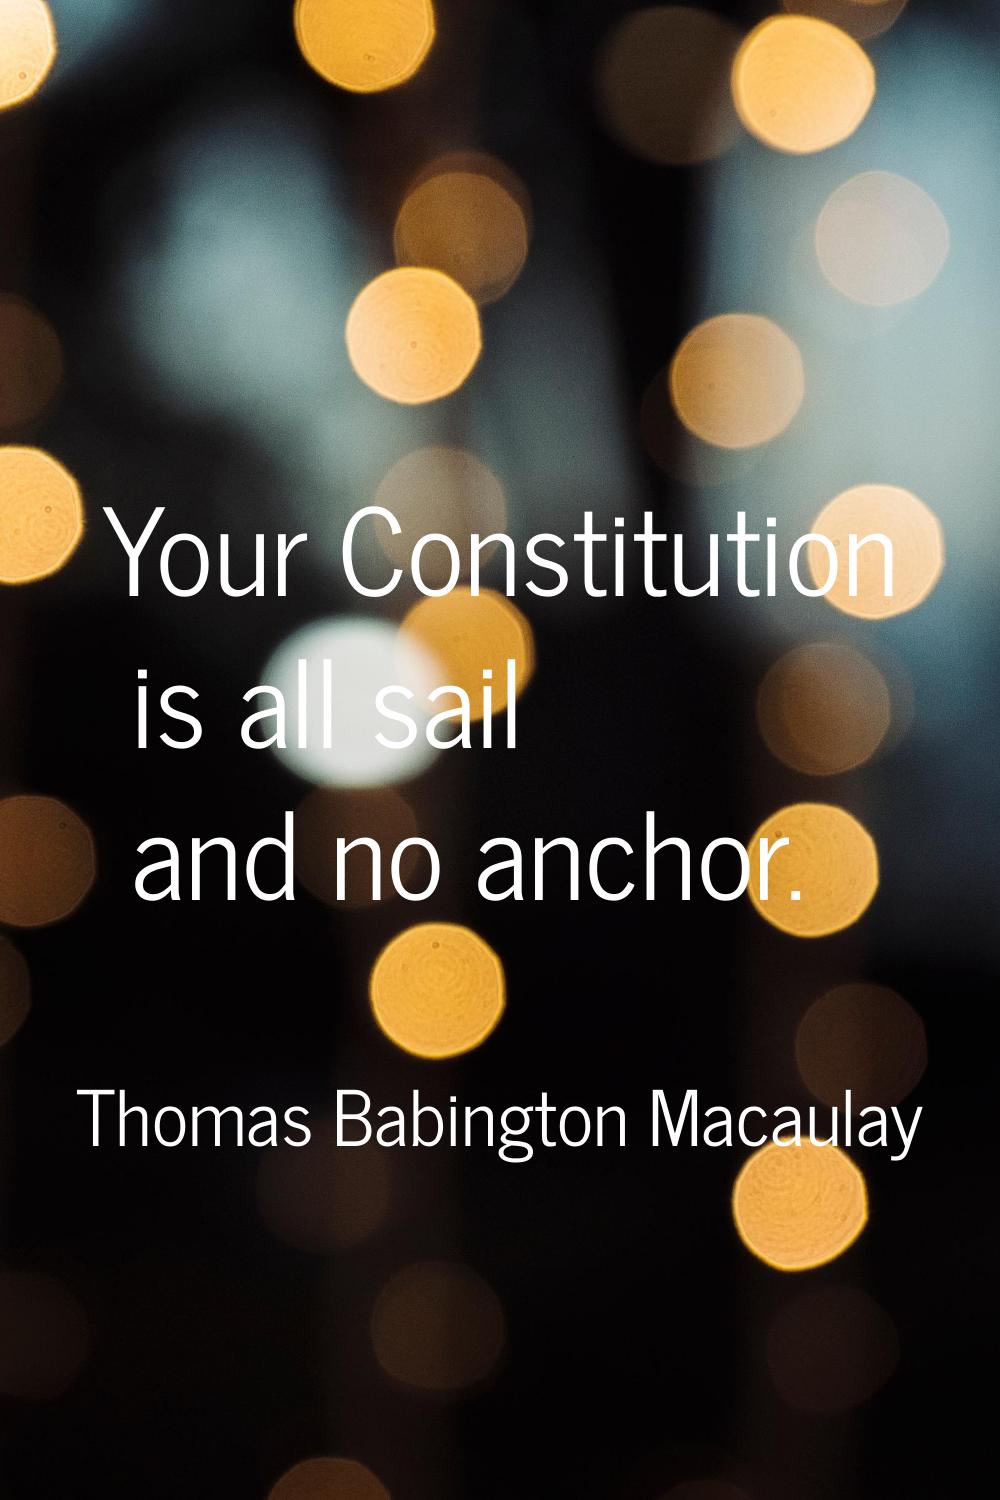 Your Constitution is all sail and no anchor.